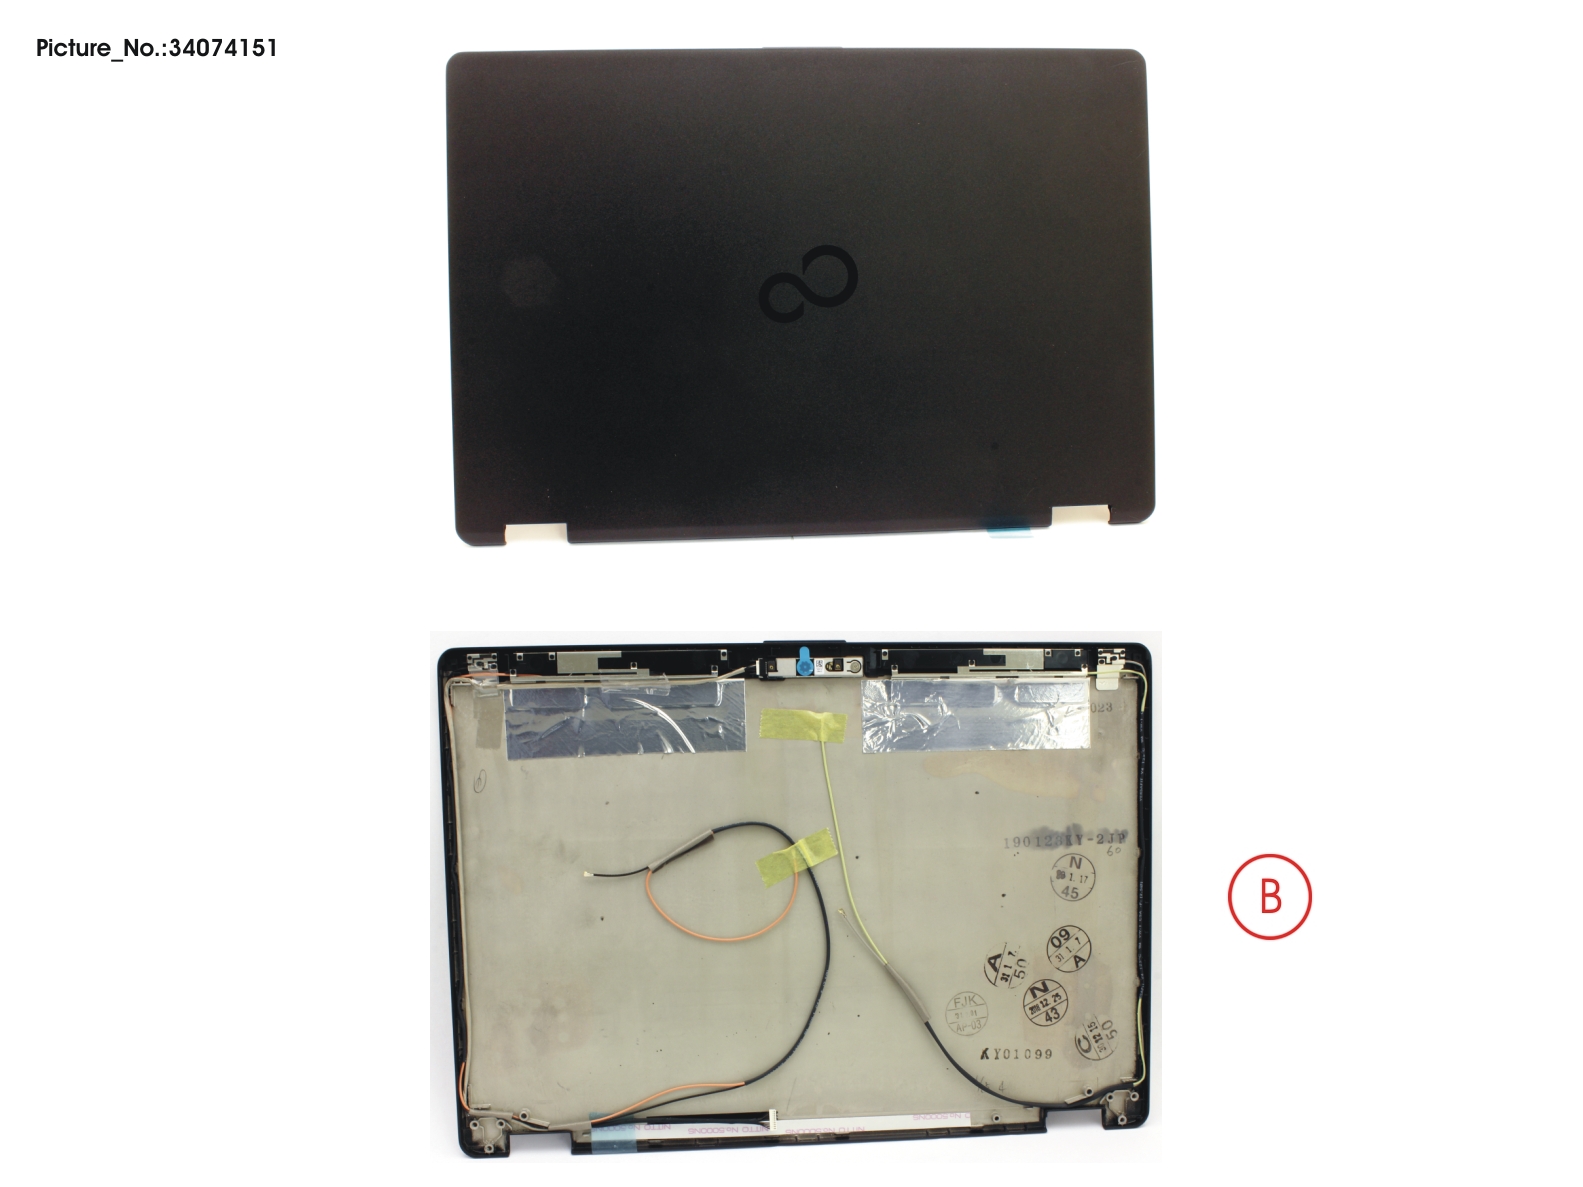 LCD BACK COVER ASSY (HD) W/ CAM/MIC